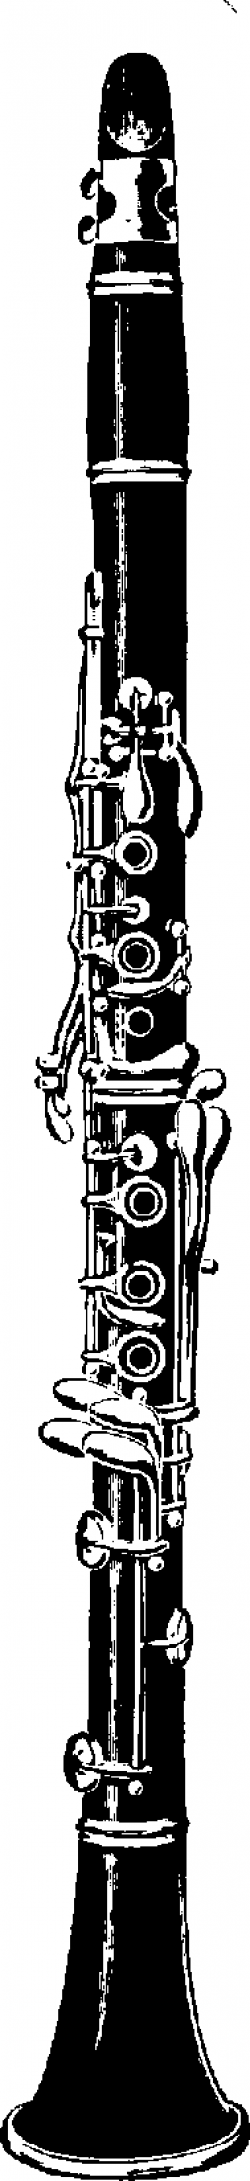 Free Clarinet Cliparts, Download Free Clip Art, Free Clip ...